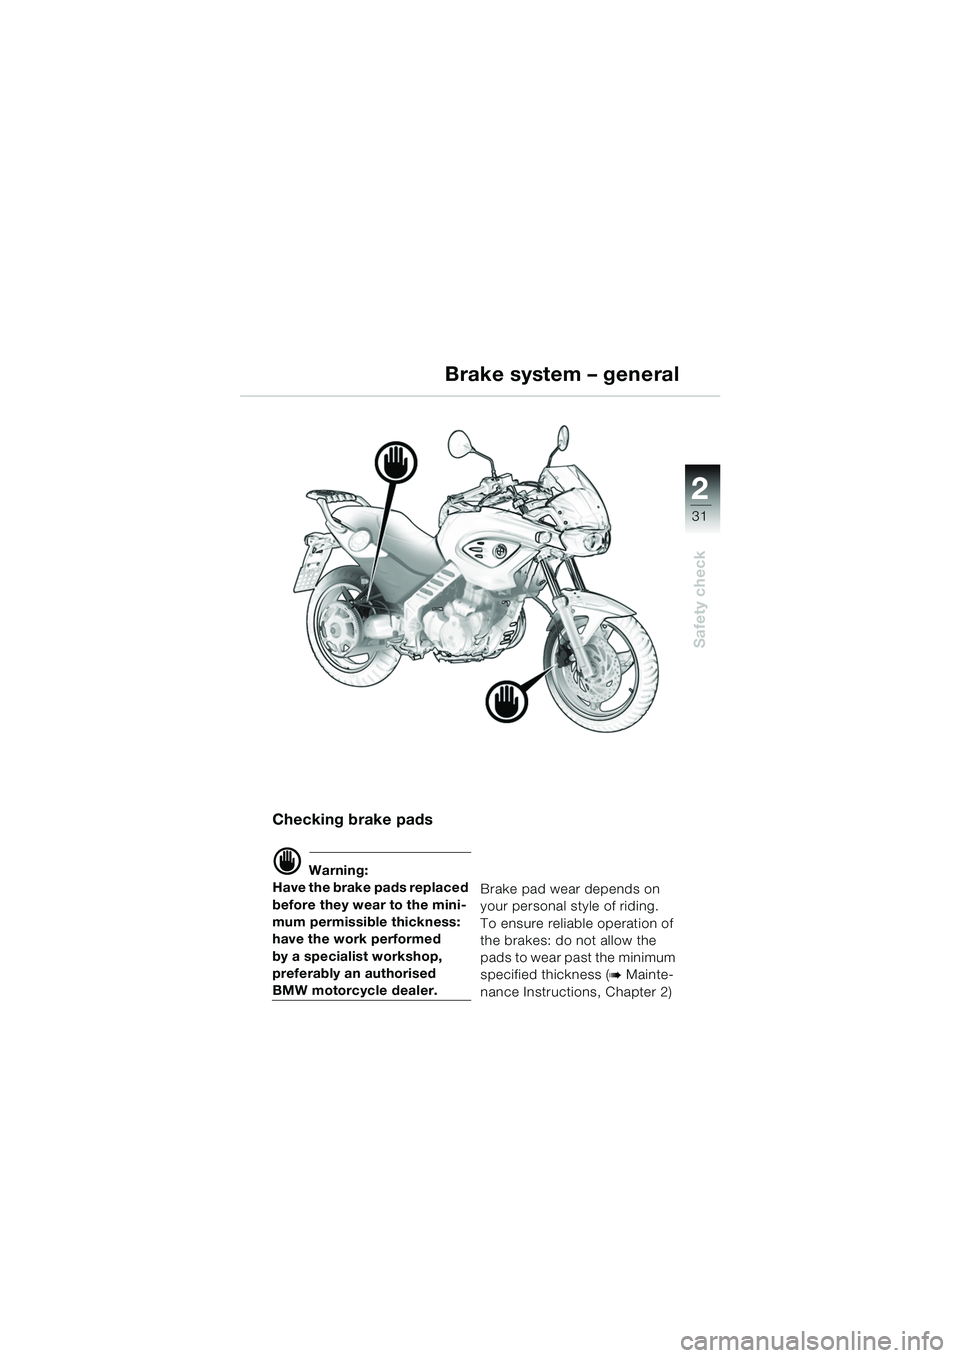 BMW MOTORRAD F 650 CS 2003  Riders Manual (in English) 1
31
Safety check
2
Brake system – general
Checking brake pads
d Warning:
Have the brake pads replaced 
before they wear to the mini-
mum permissible thickness: 
have the work performed
by a special